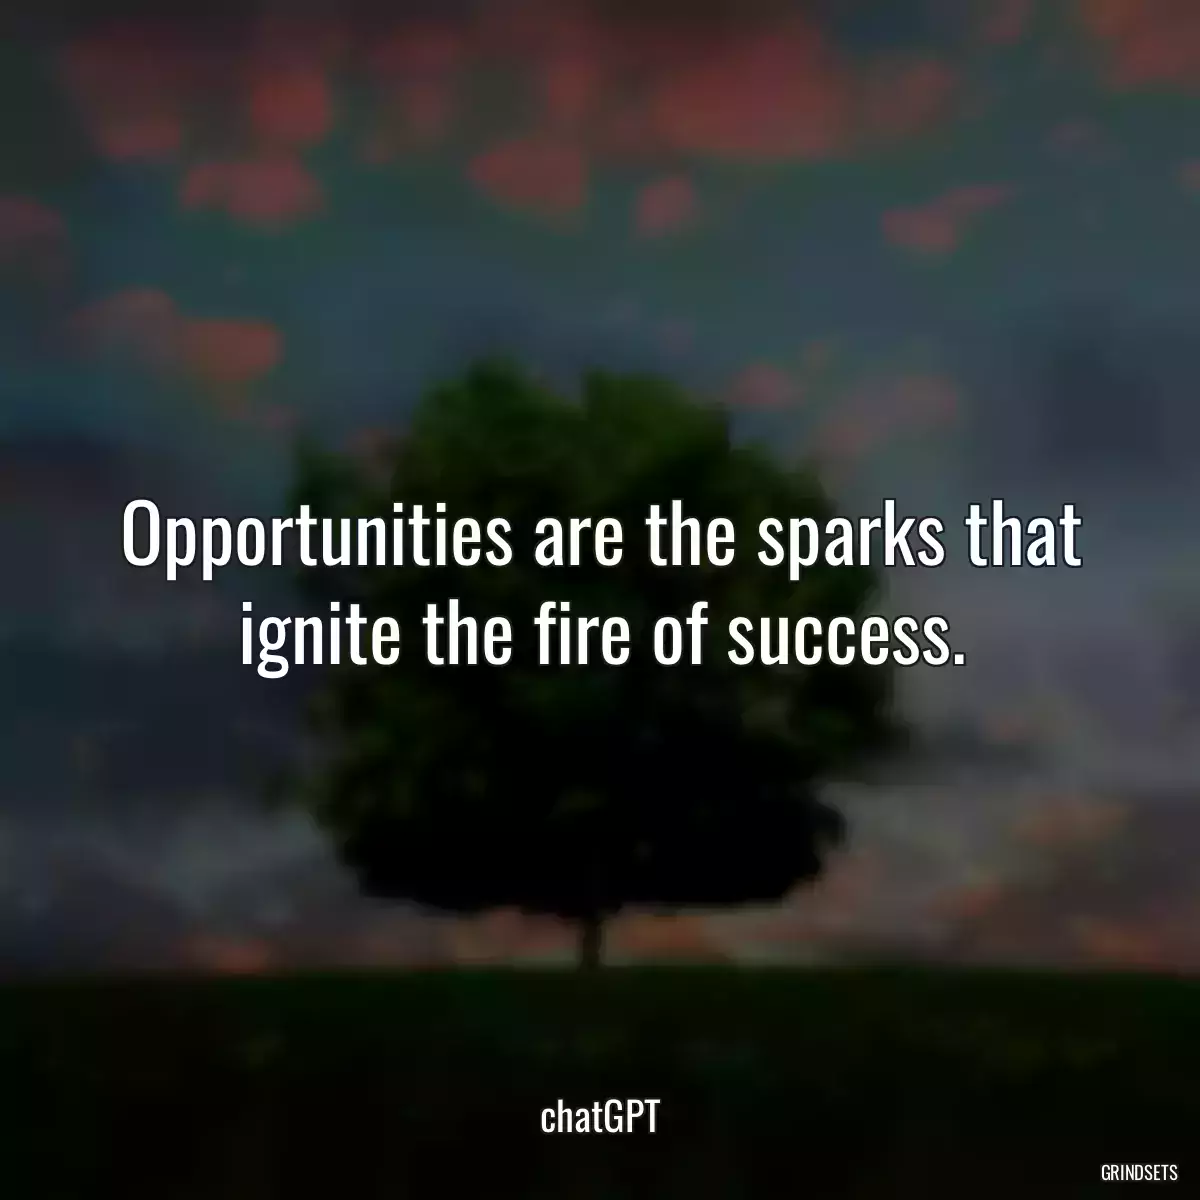 Opportunities are the sparks that ignite the fire of success.